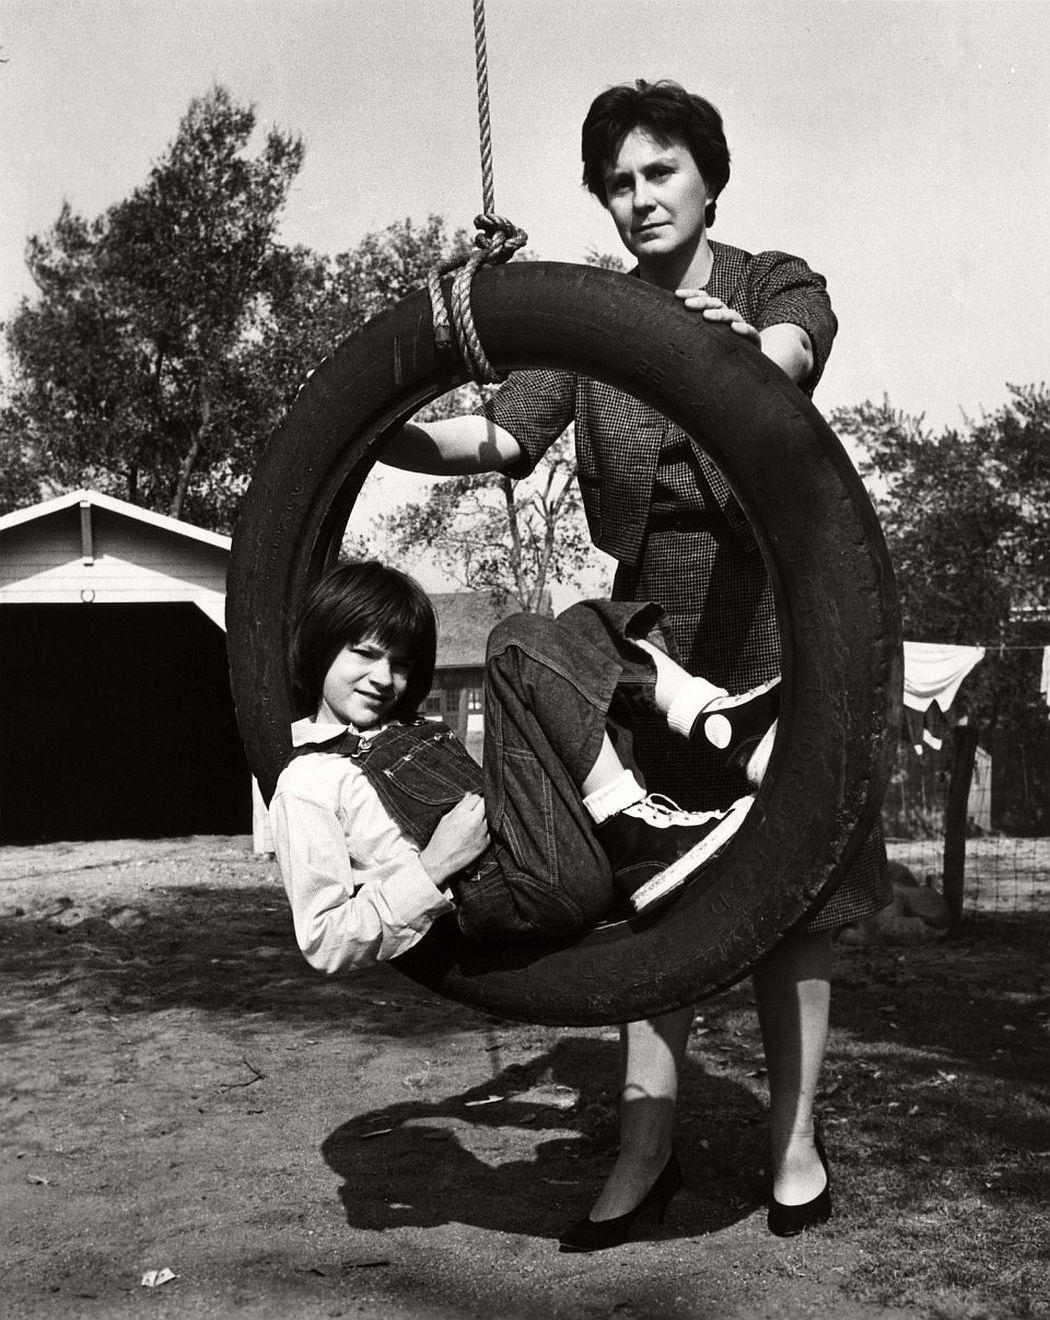 Vintage: Behind the Scenes from To Kill a Mockingbird (1962)